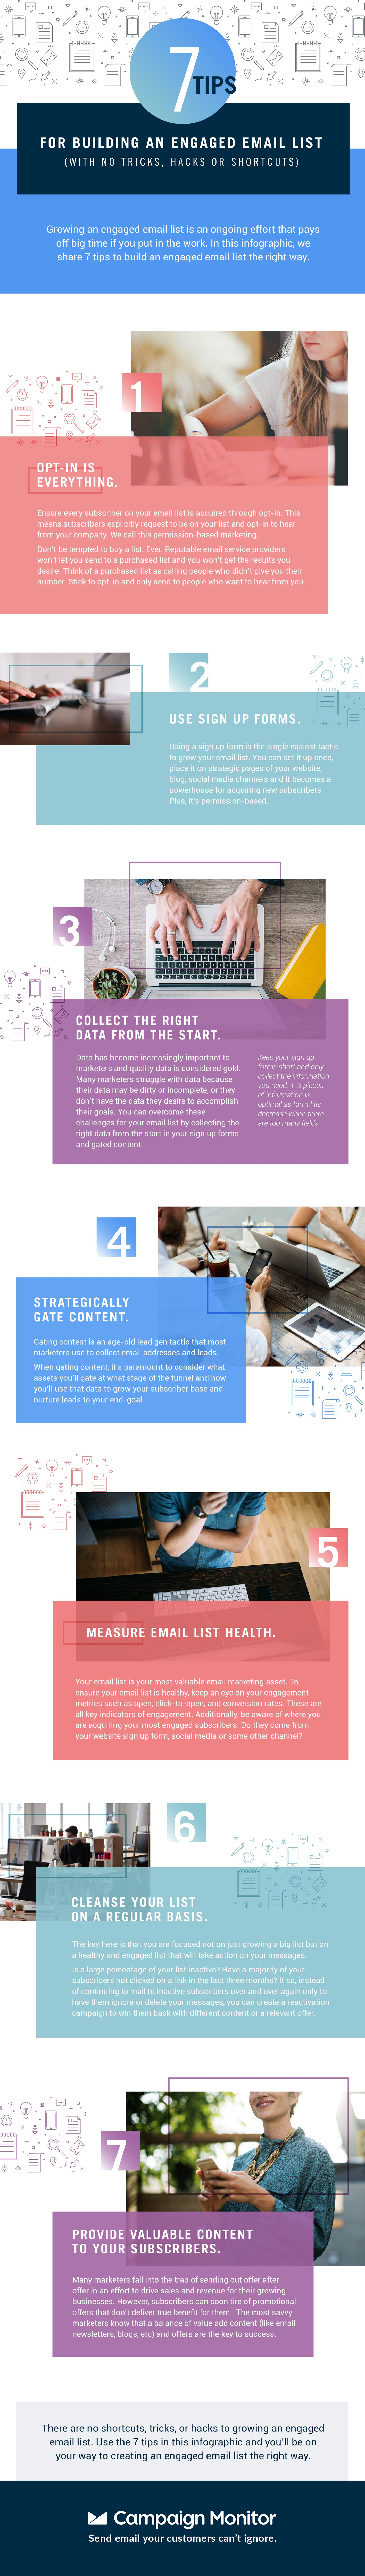 7 Tips for Building an Engaged Email List - #infographic